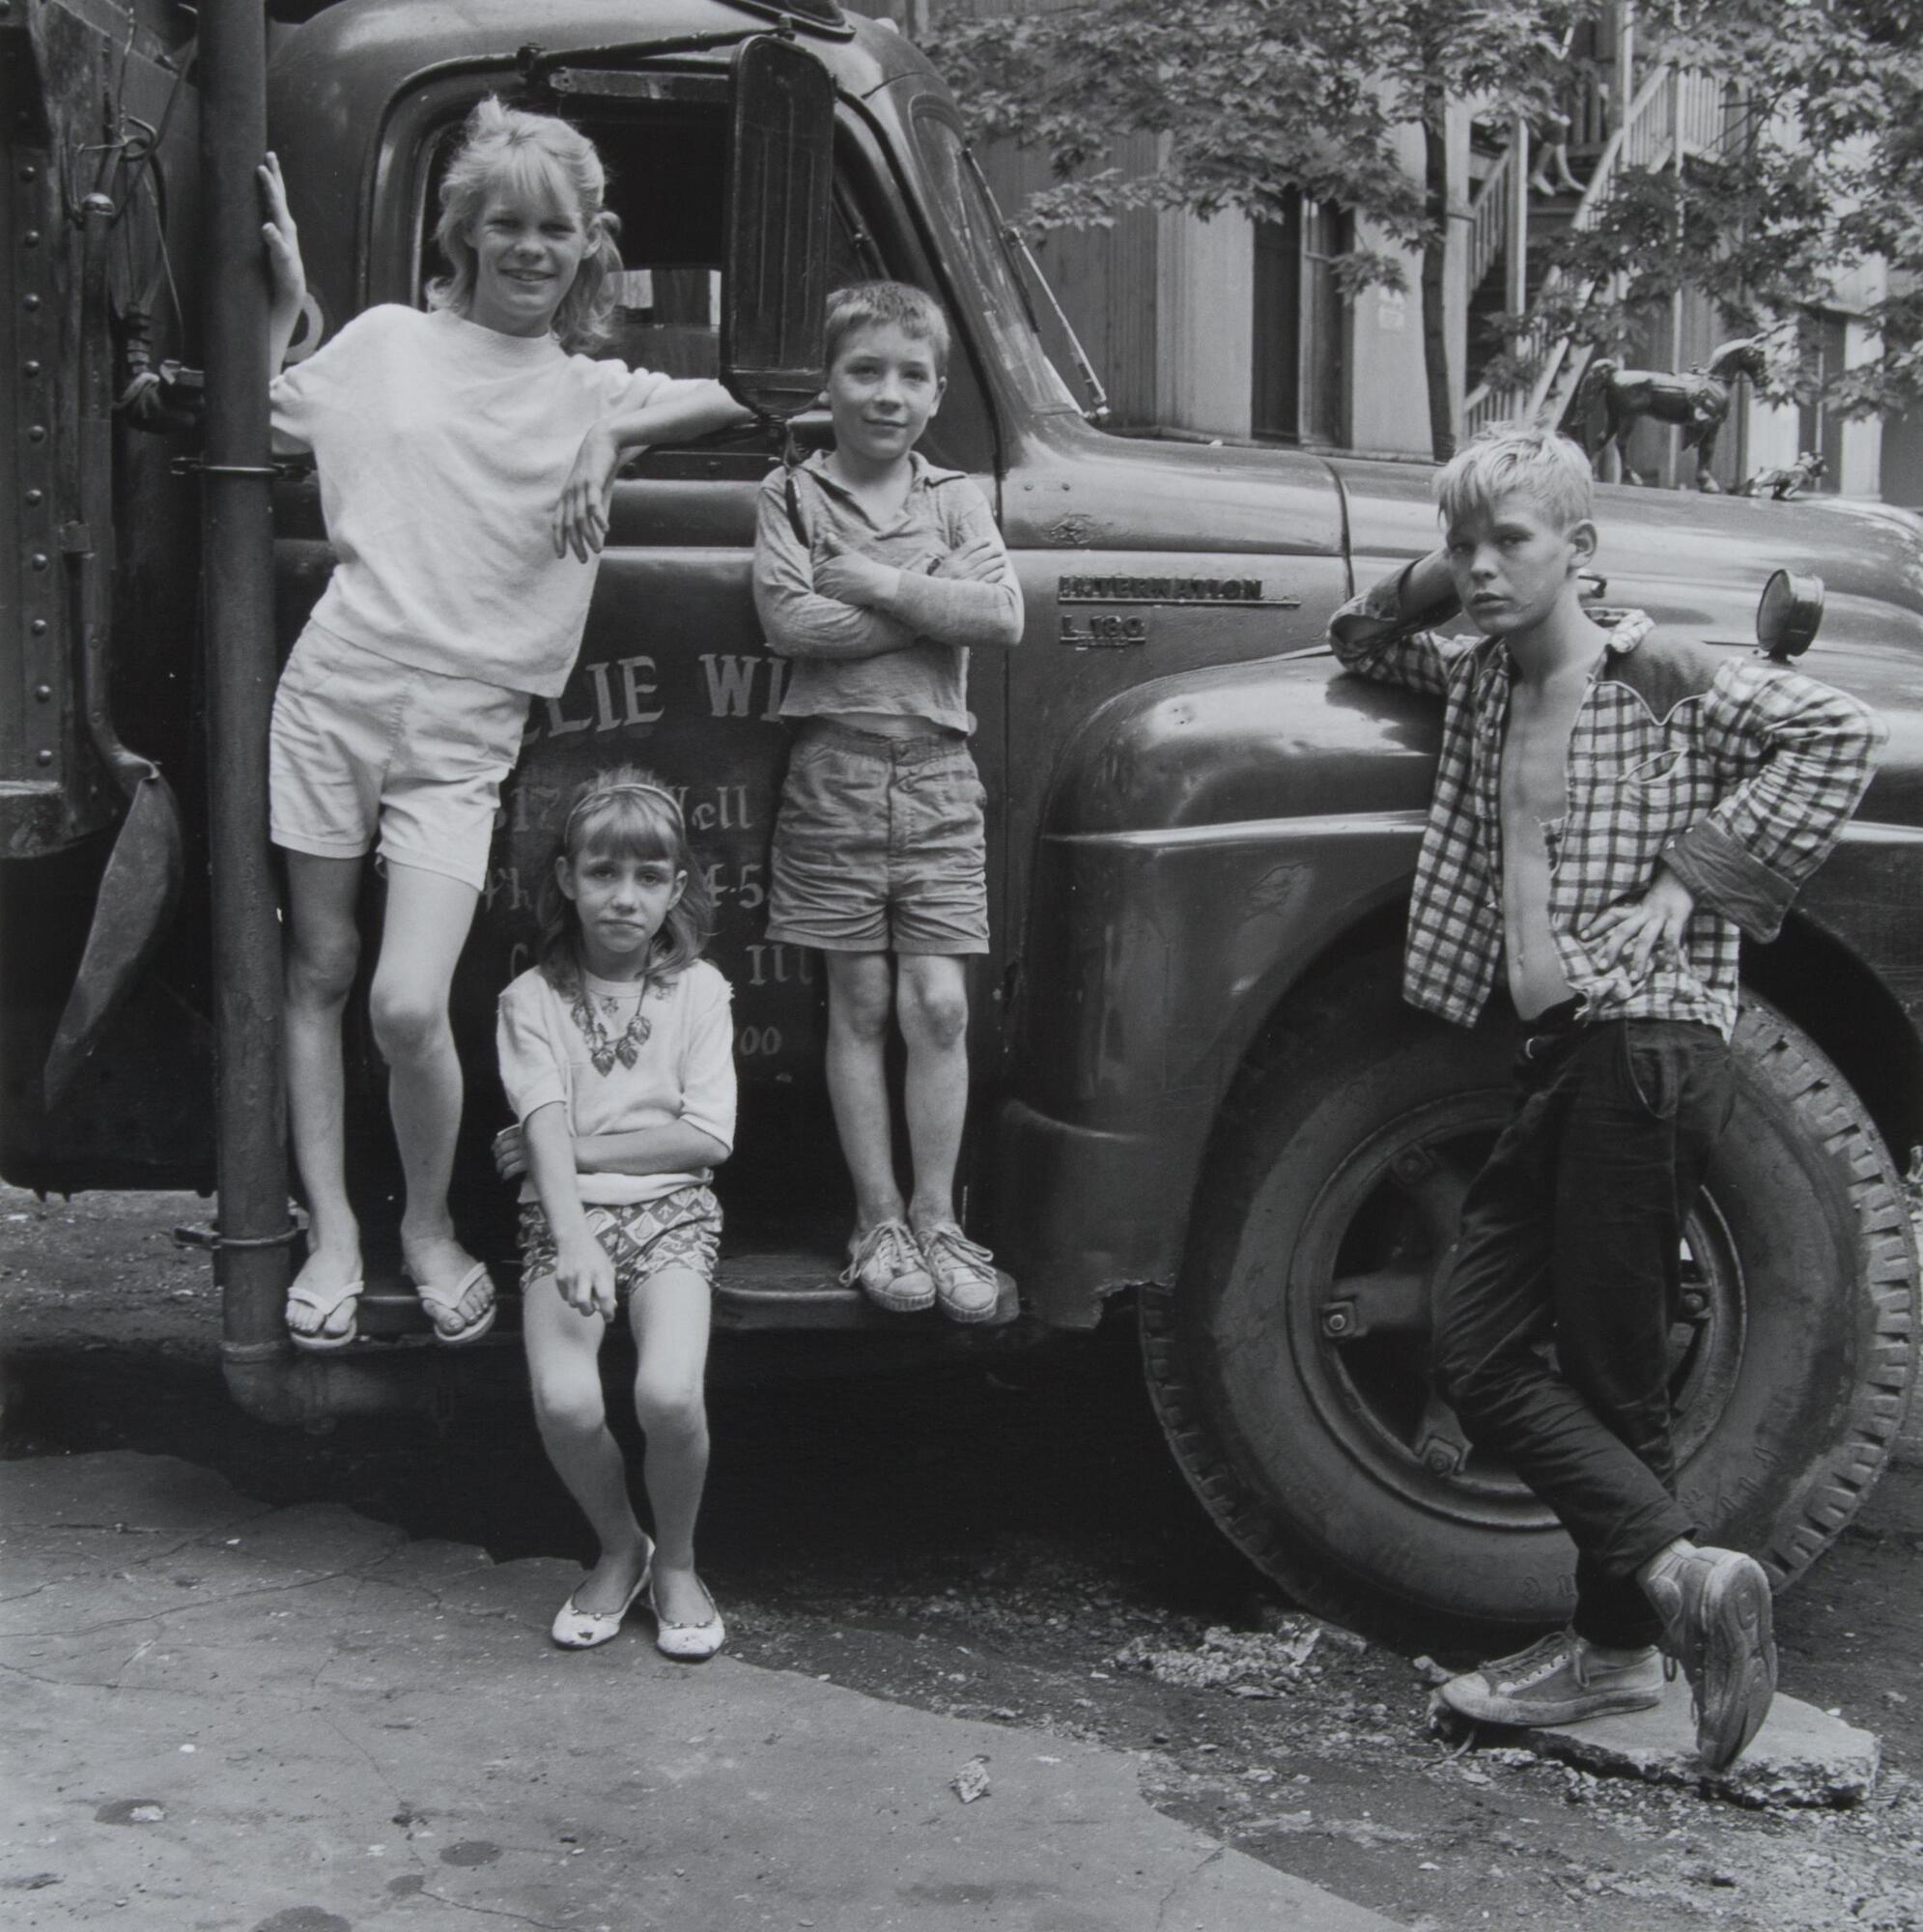 A photograph of four children leaning against a truck. On the left, three children are grouped together, two young girls, and a boy. On the right, another boy leans his arm against the hub of the wheel; his other arm is akimbo.